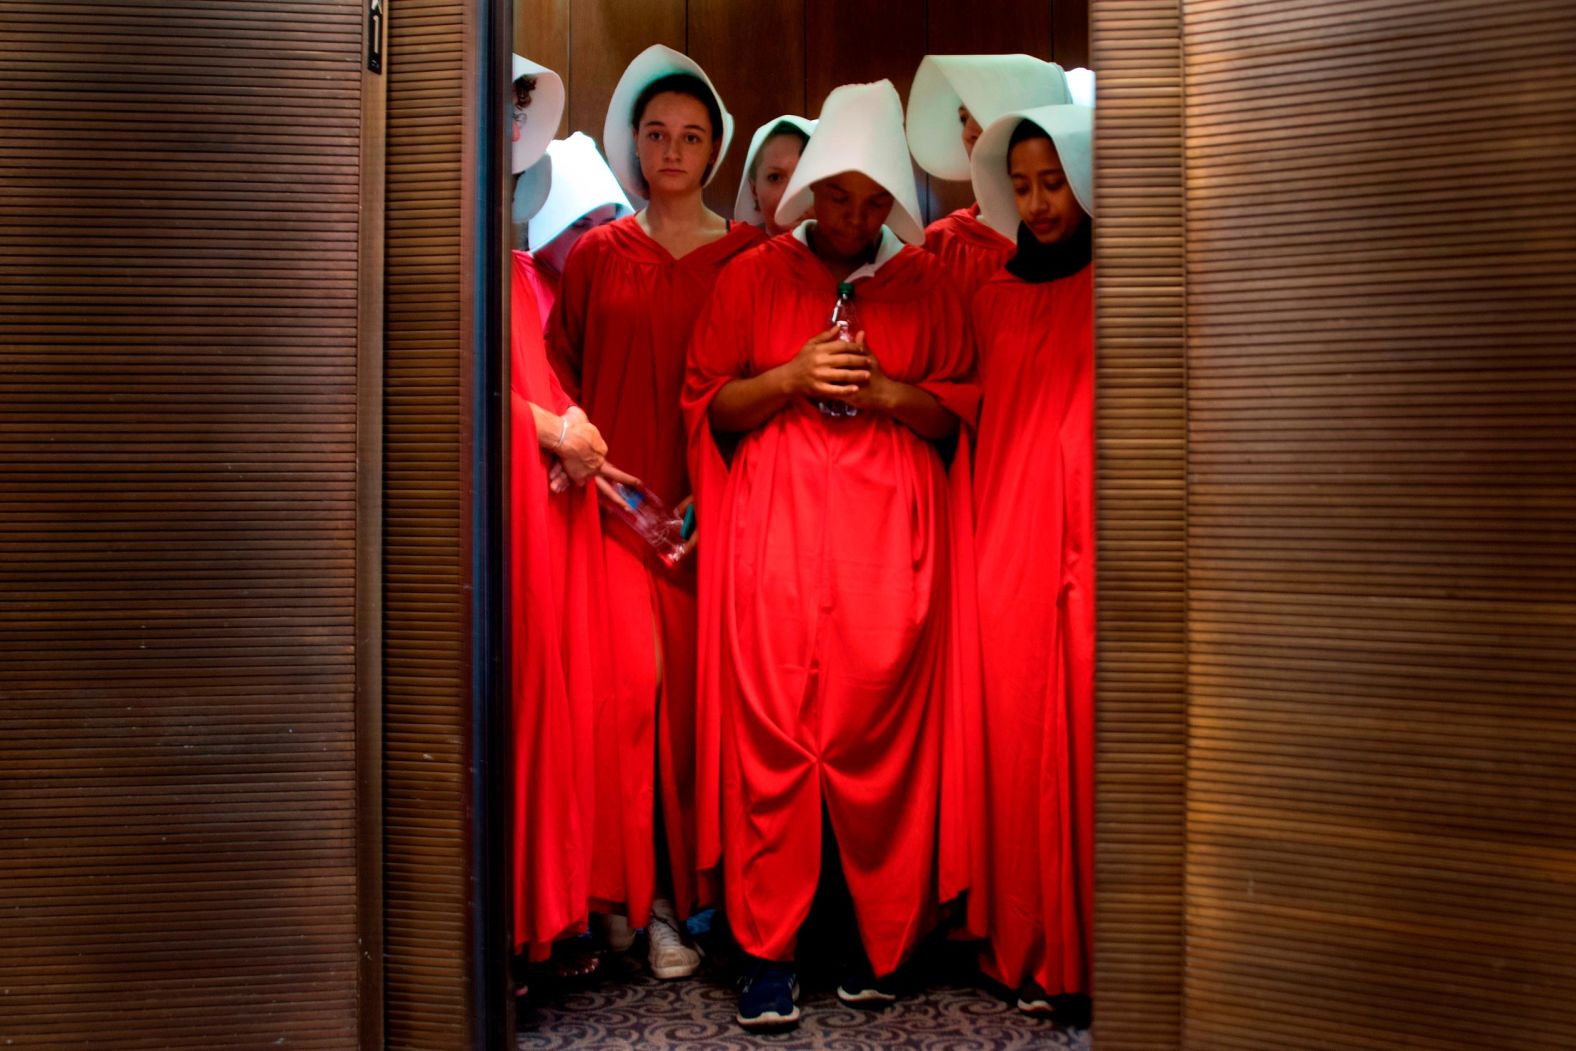 Protesters dressed as characters from the TV show "The Handmaid's Tale" stand in an elevator at the Hart Senate Office Building on Tuesday. <a href="https://www.cnn.com/2018/09/05/politics/kavanaugh-senate-hearing-handmaids-tale-protesters/index.html" target="_blank">The costumes have become a popular symbol for women's rights,</a> not only in the United States but across the globe.